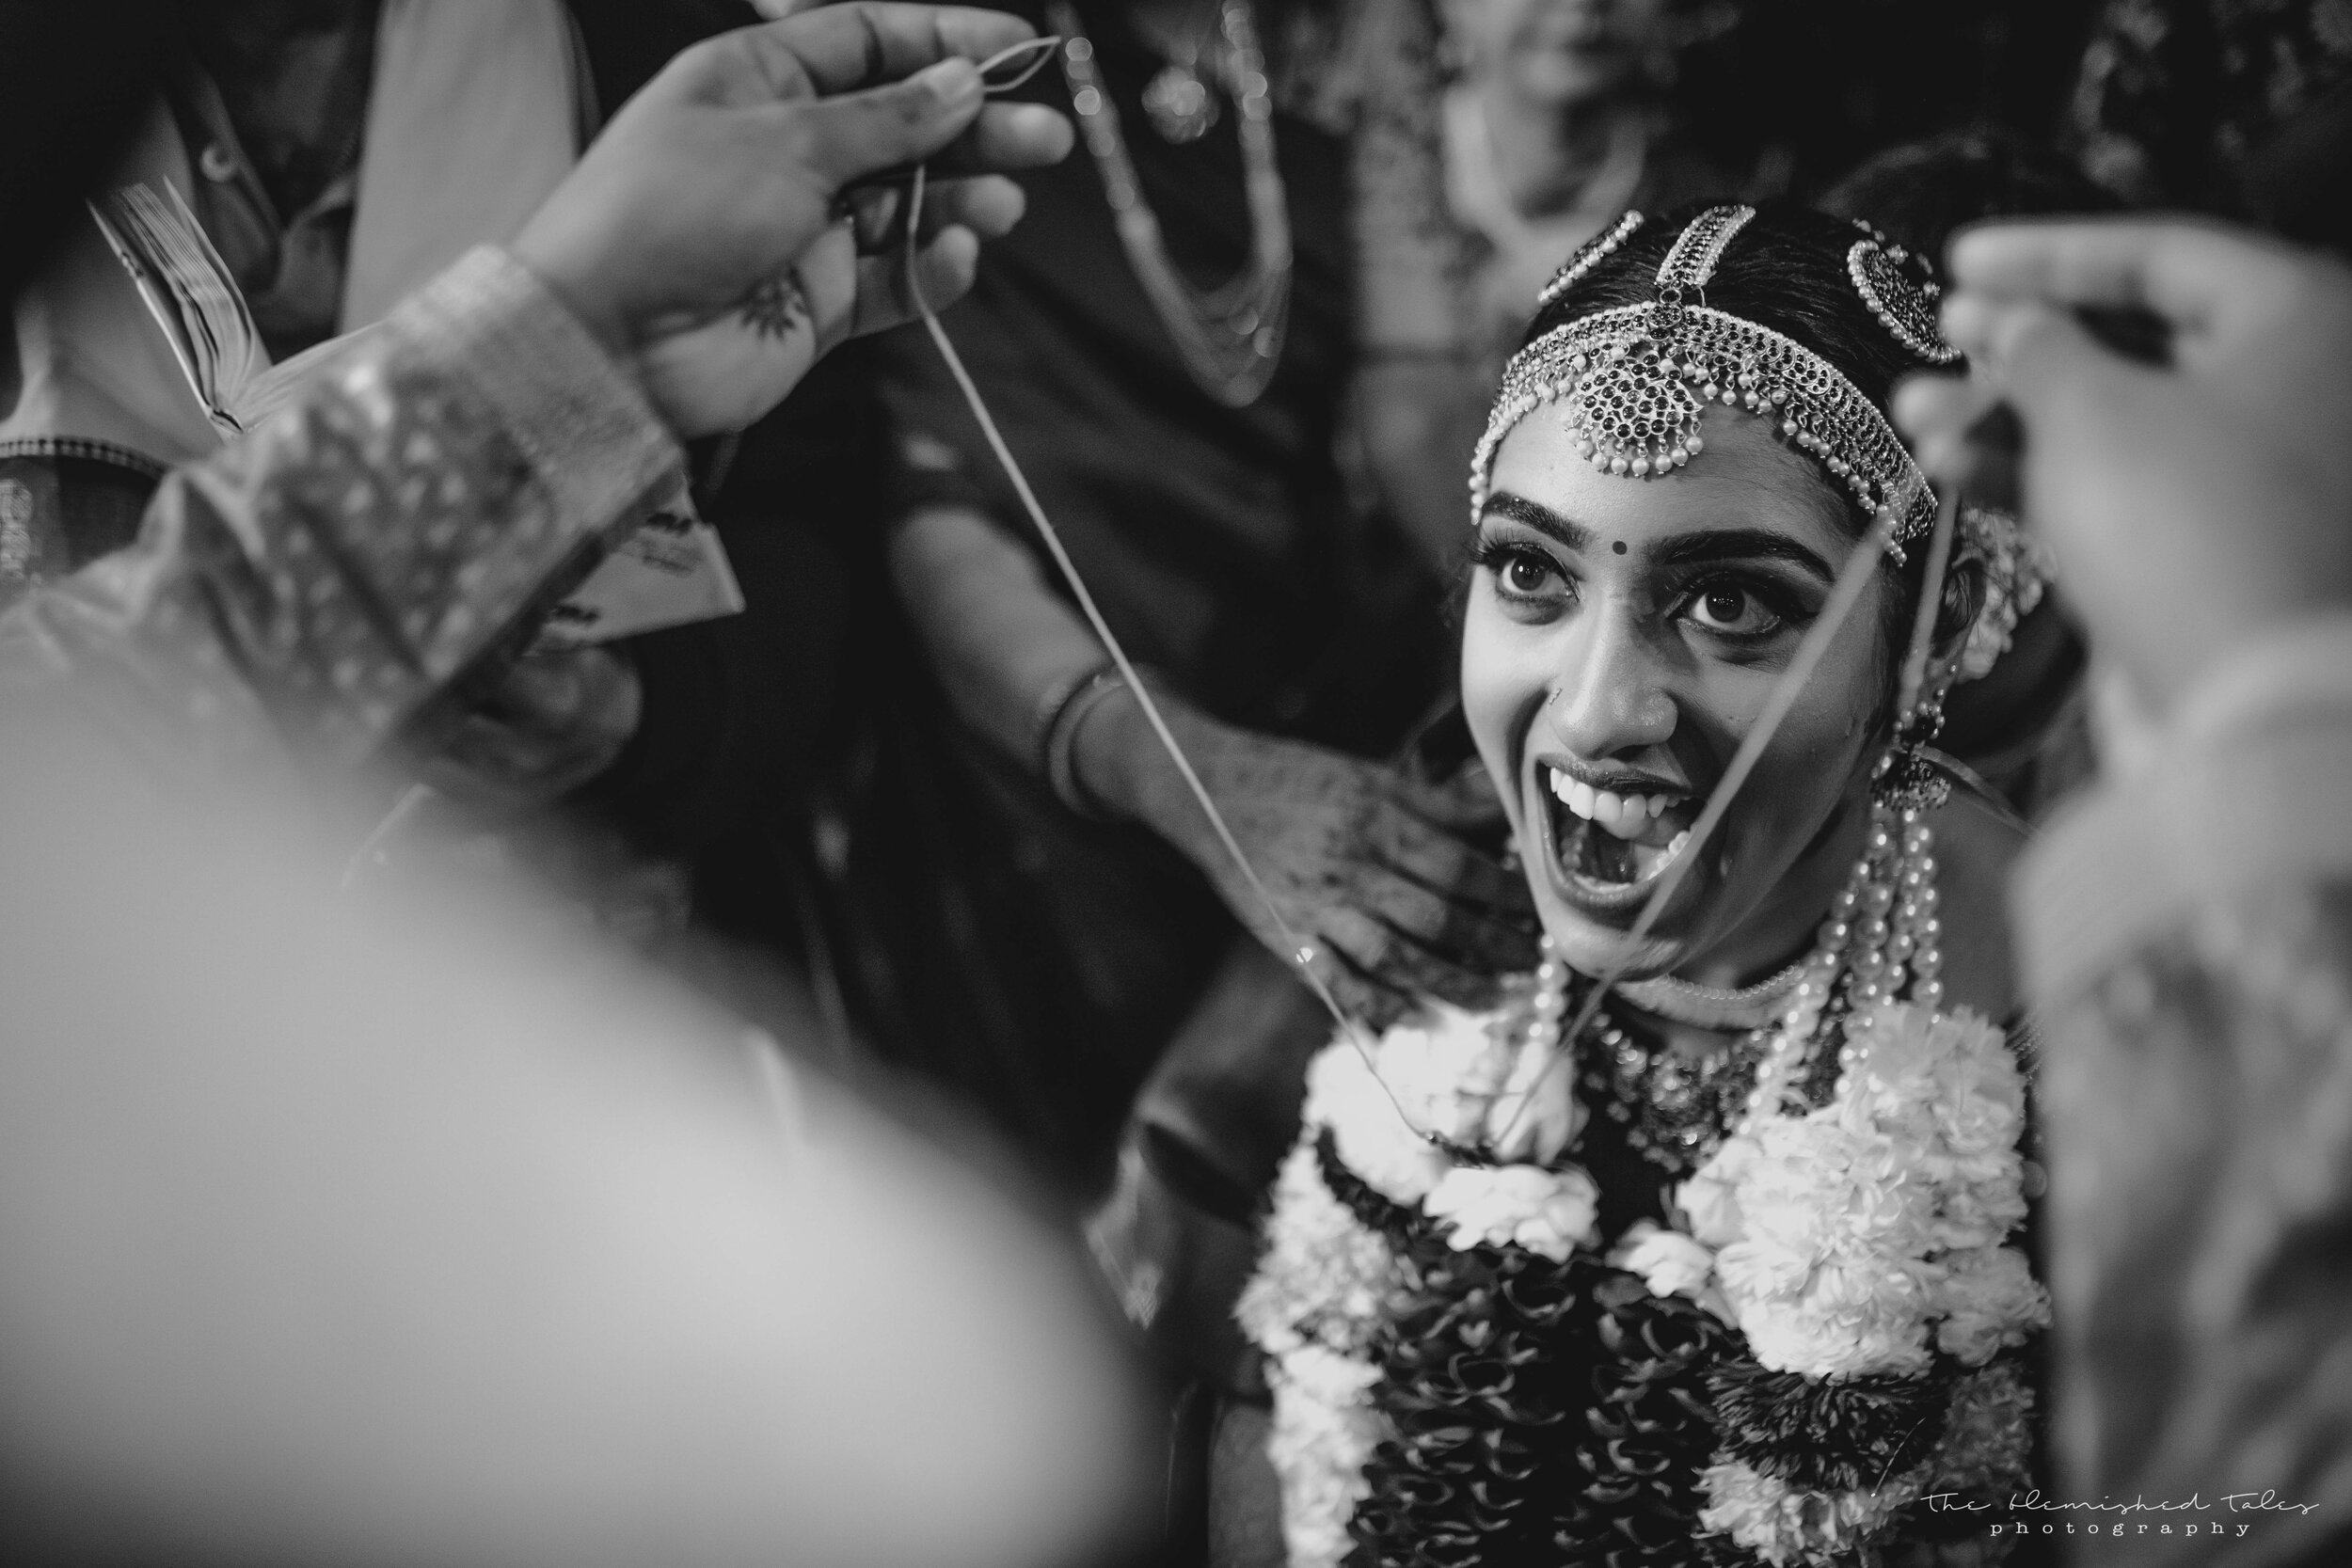 Maya, just before her Mangalsutra (a sacred ceremony in Indian weddings signifying their union).